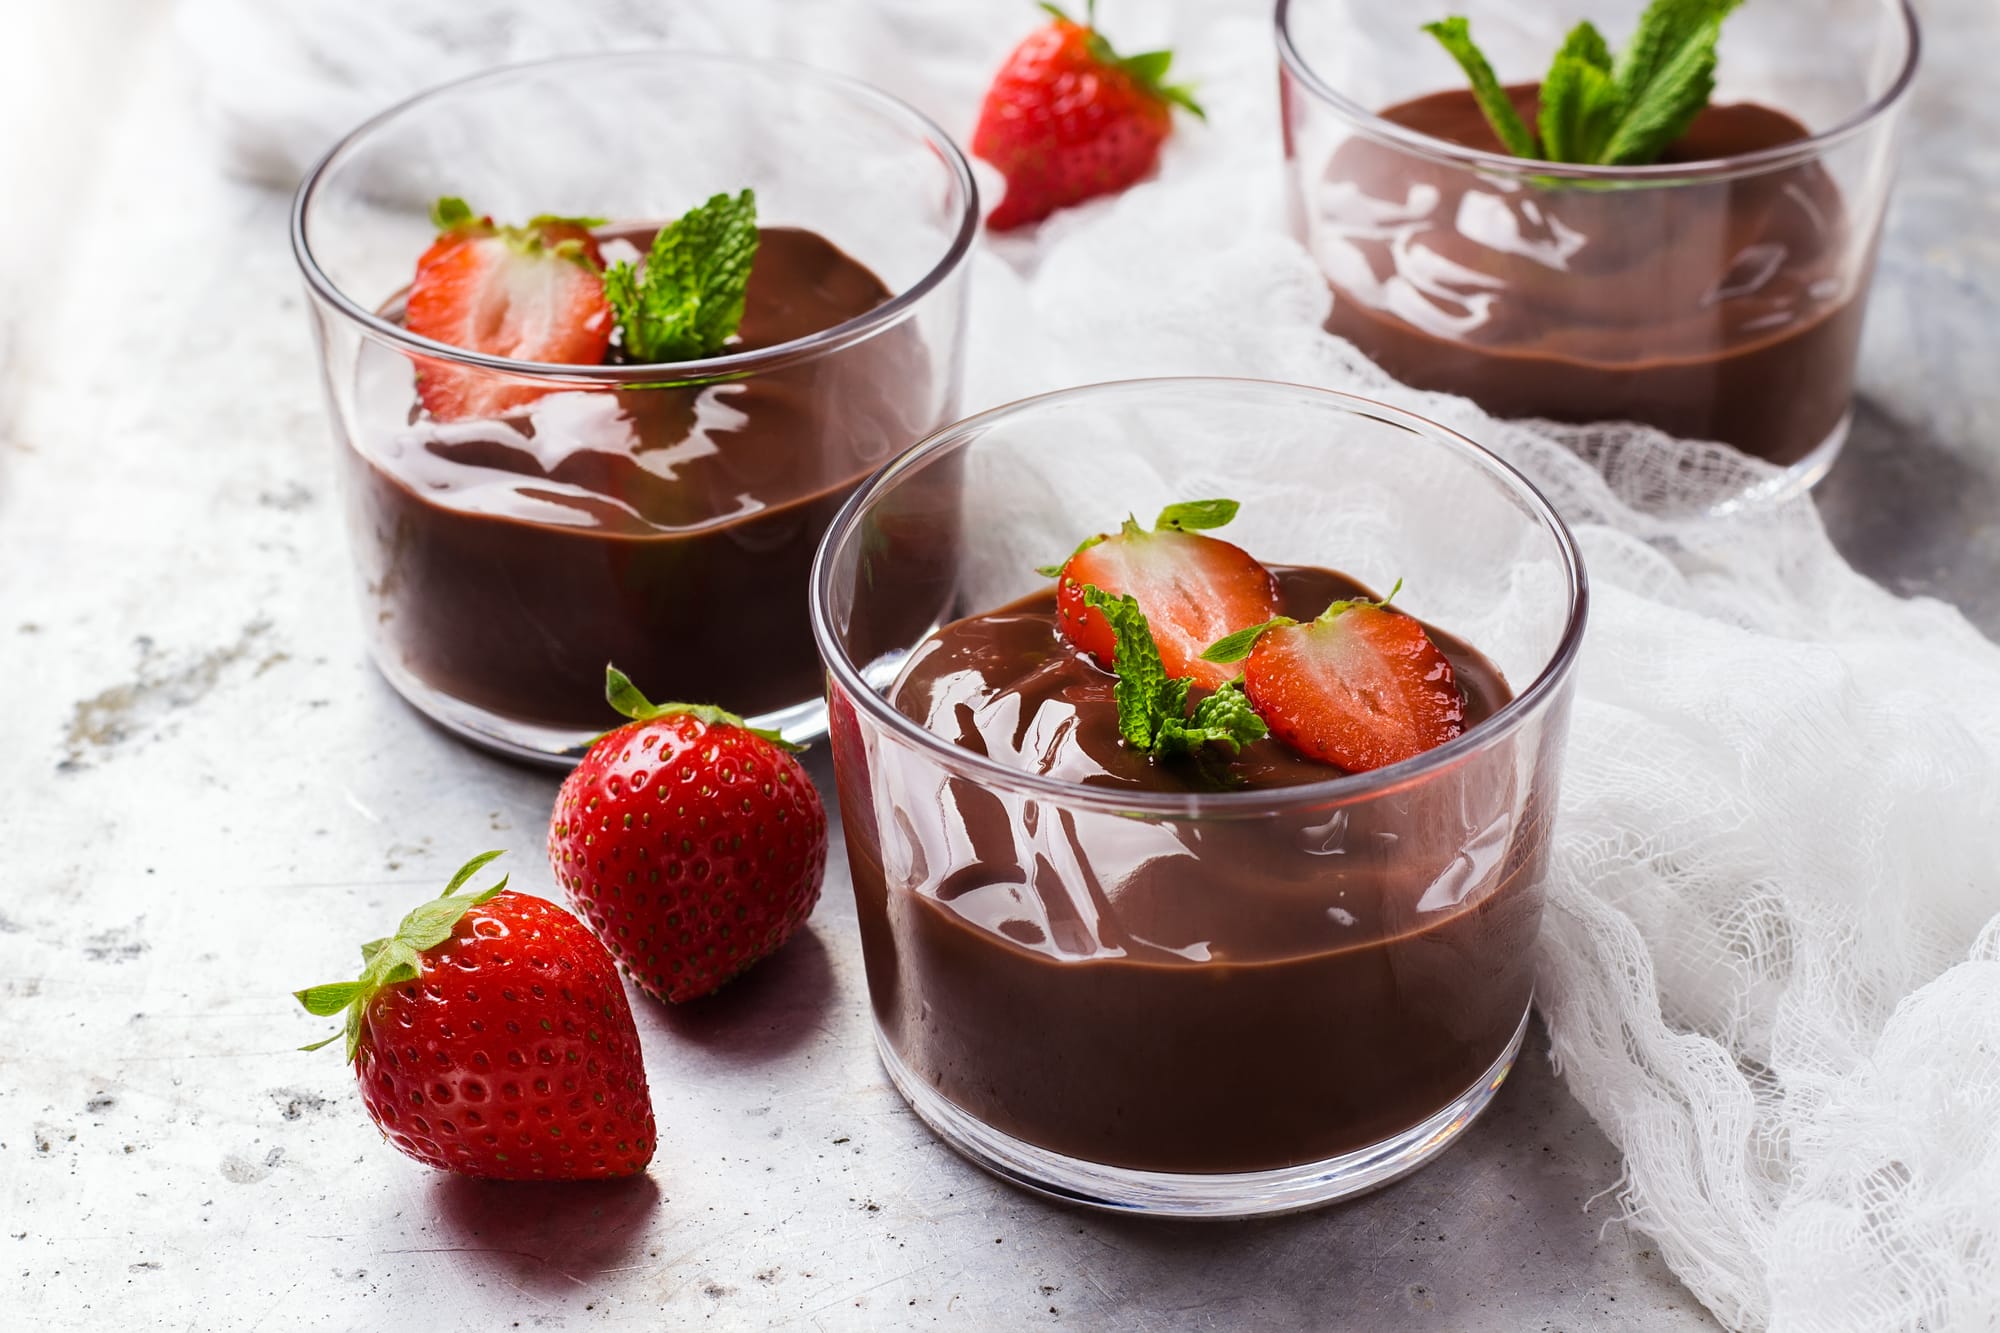 Chocolate and Maple Mousse